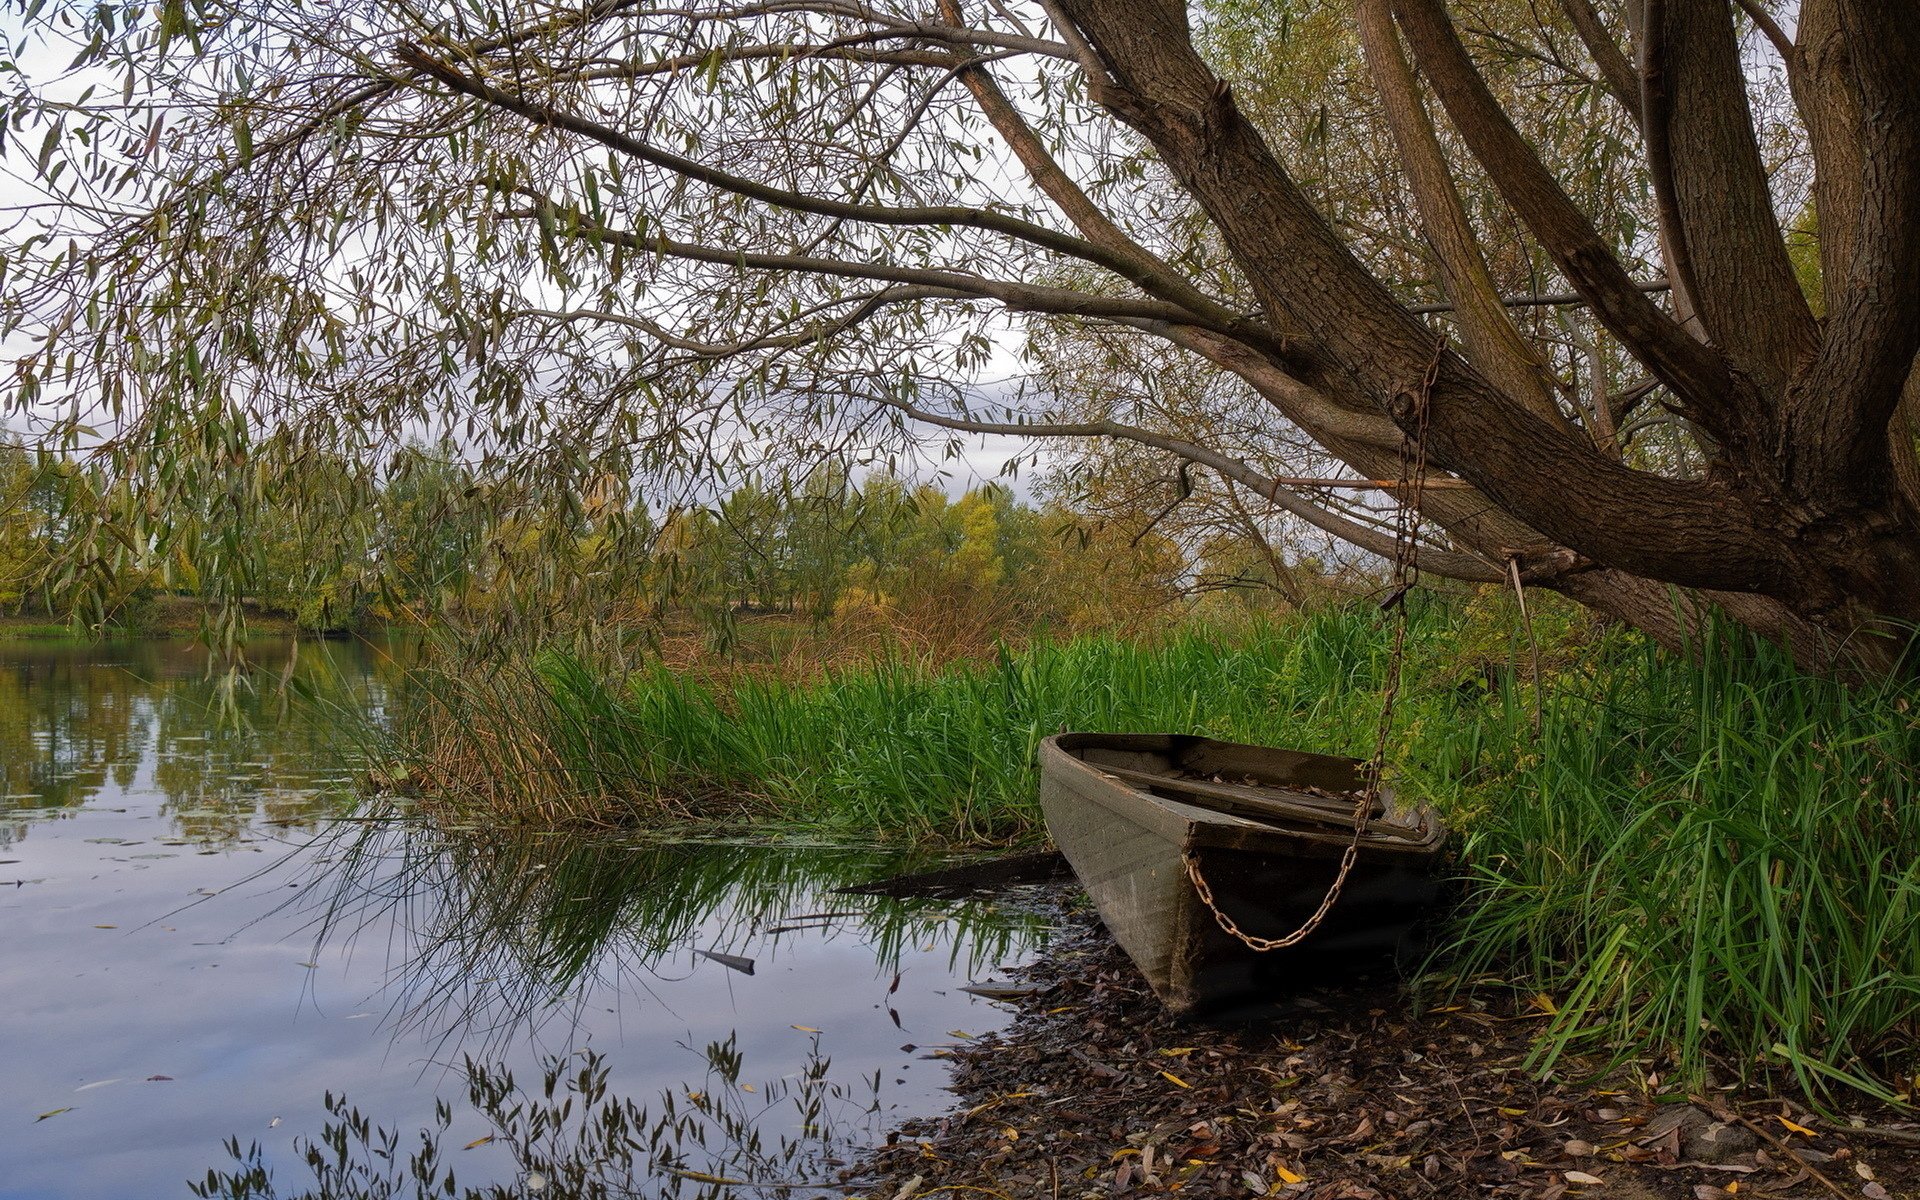 An old wooden boat on the riverbank